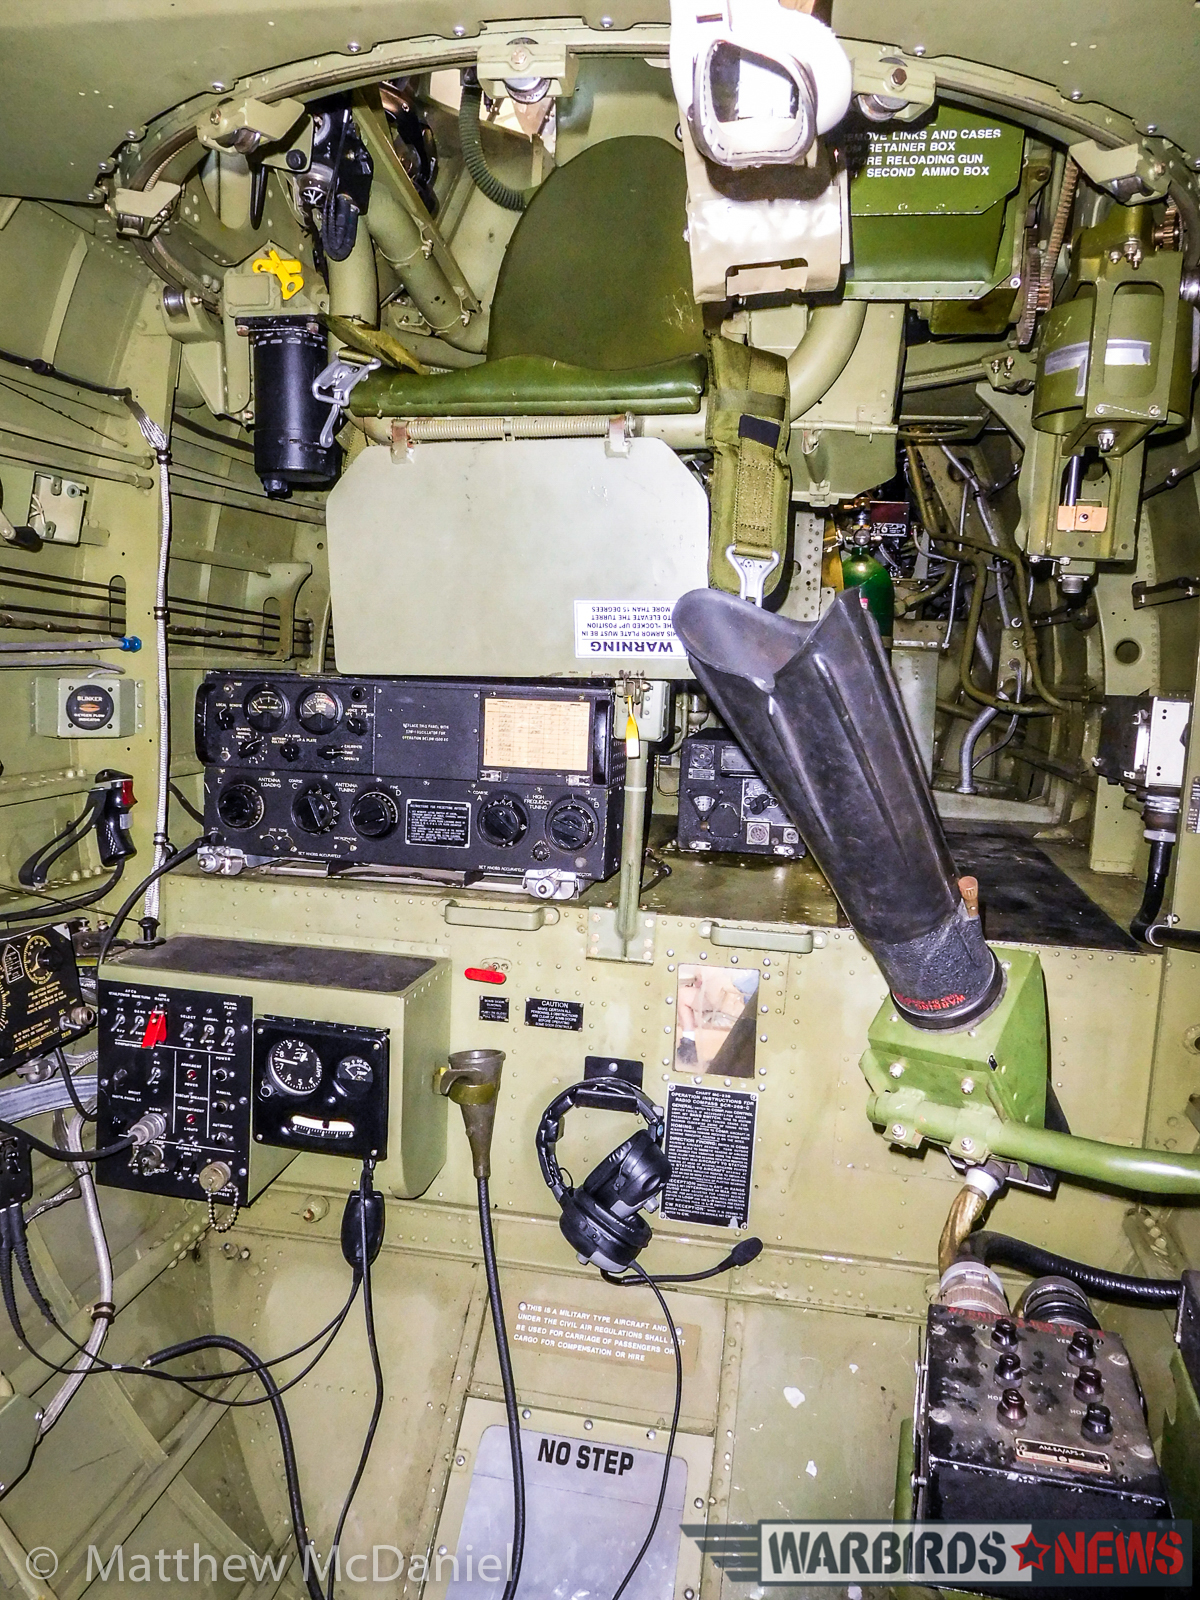 The bombardier/radioman position in the lower tail of Deckert's TBM bristles with original equipment. Also visible is the turret gunner's seat (top left) and the “tunnel” leading forward to the mid-cabin area. (Photo by Matthew McDaniel)